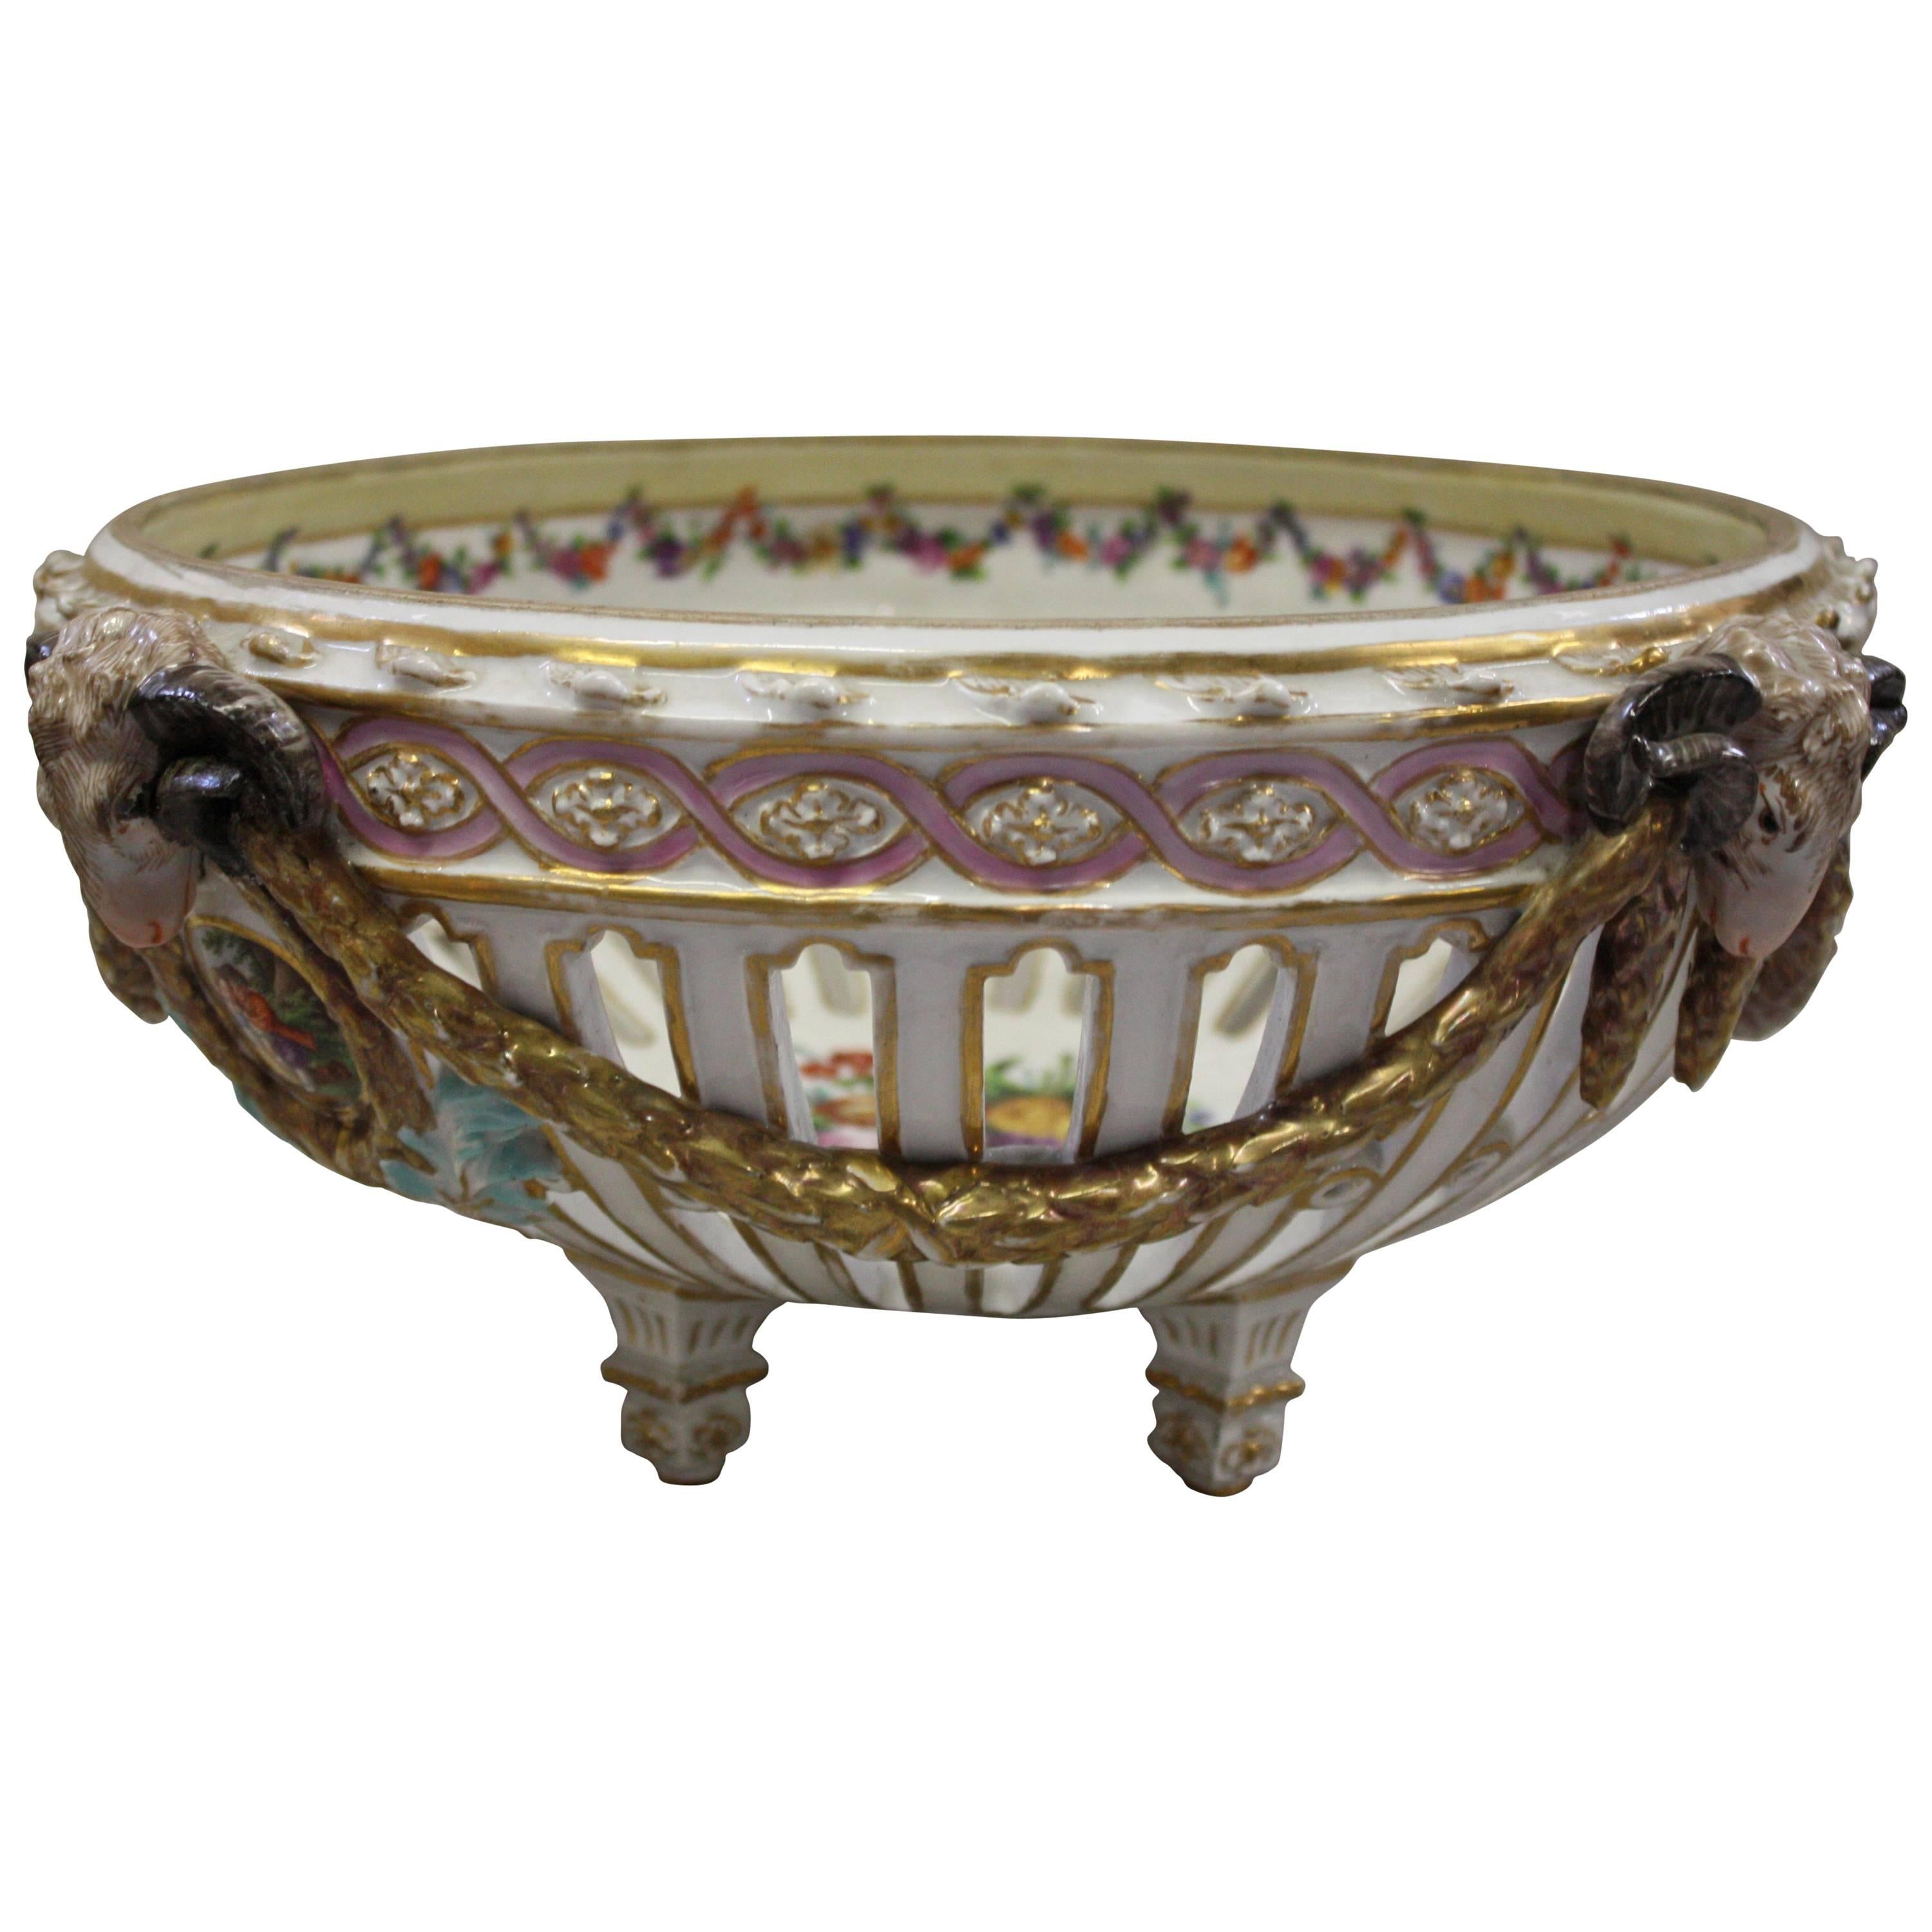 19th Century French Porcelain Urn